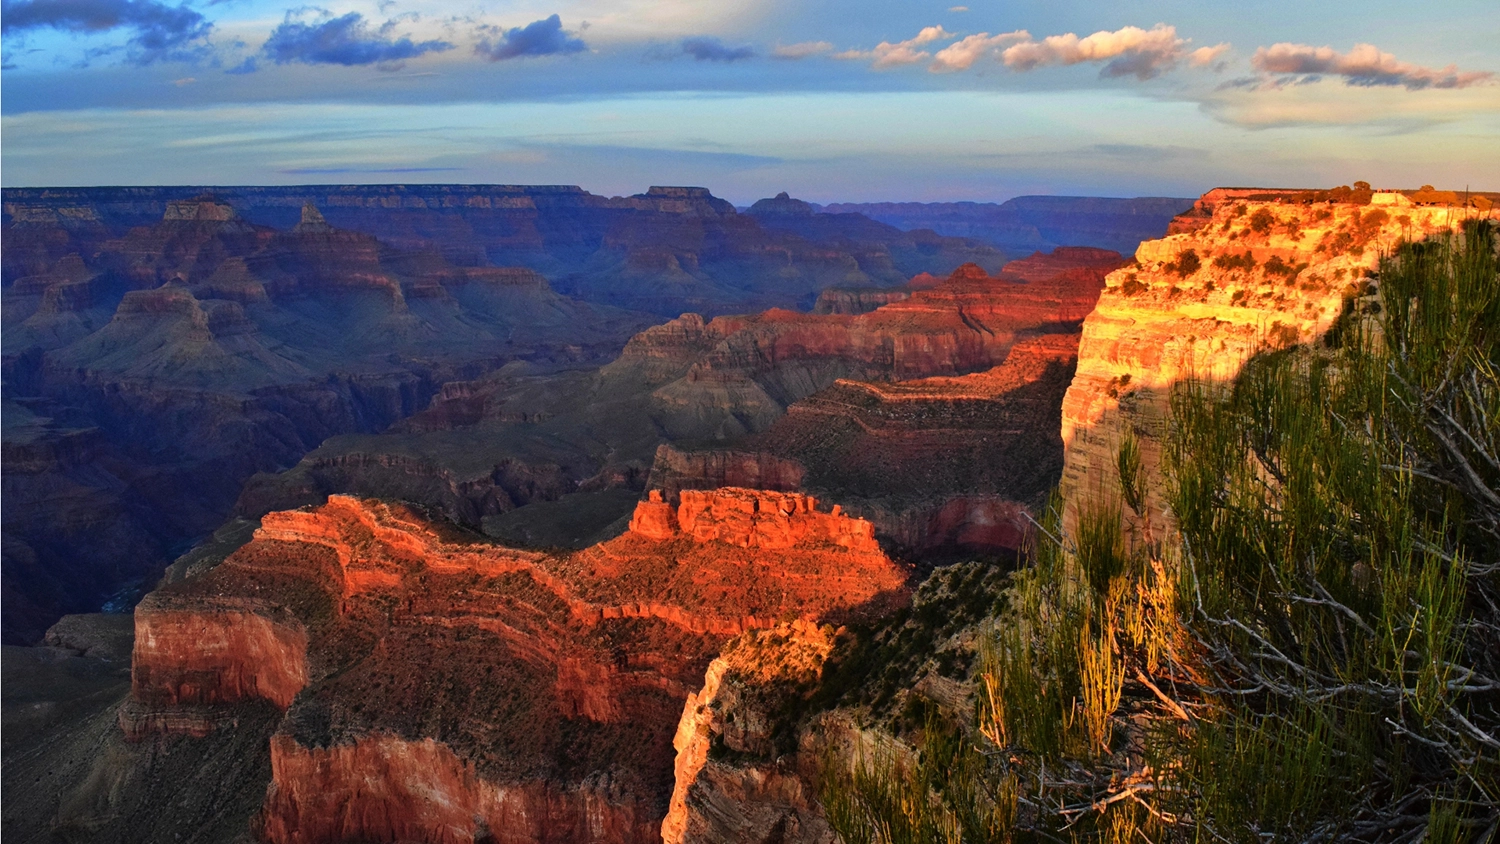 Rent a Sprinter van in Las Vegas and journey to the Grand Canyon!